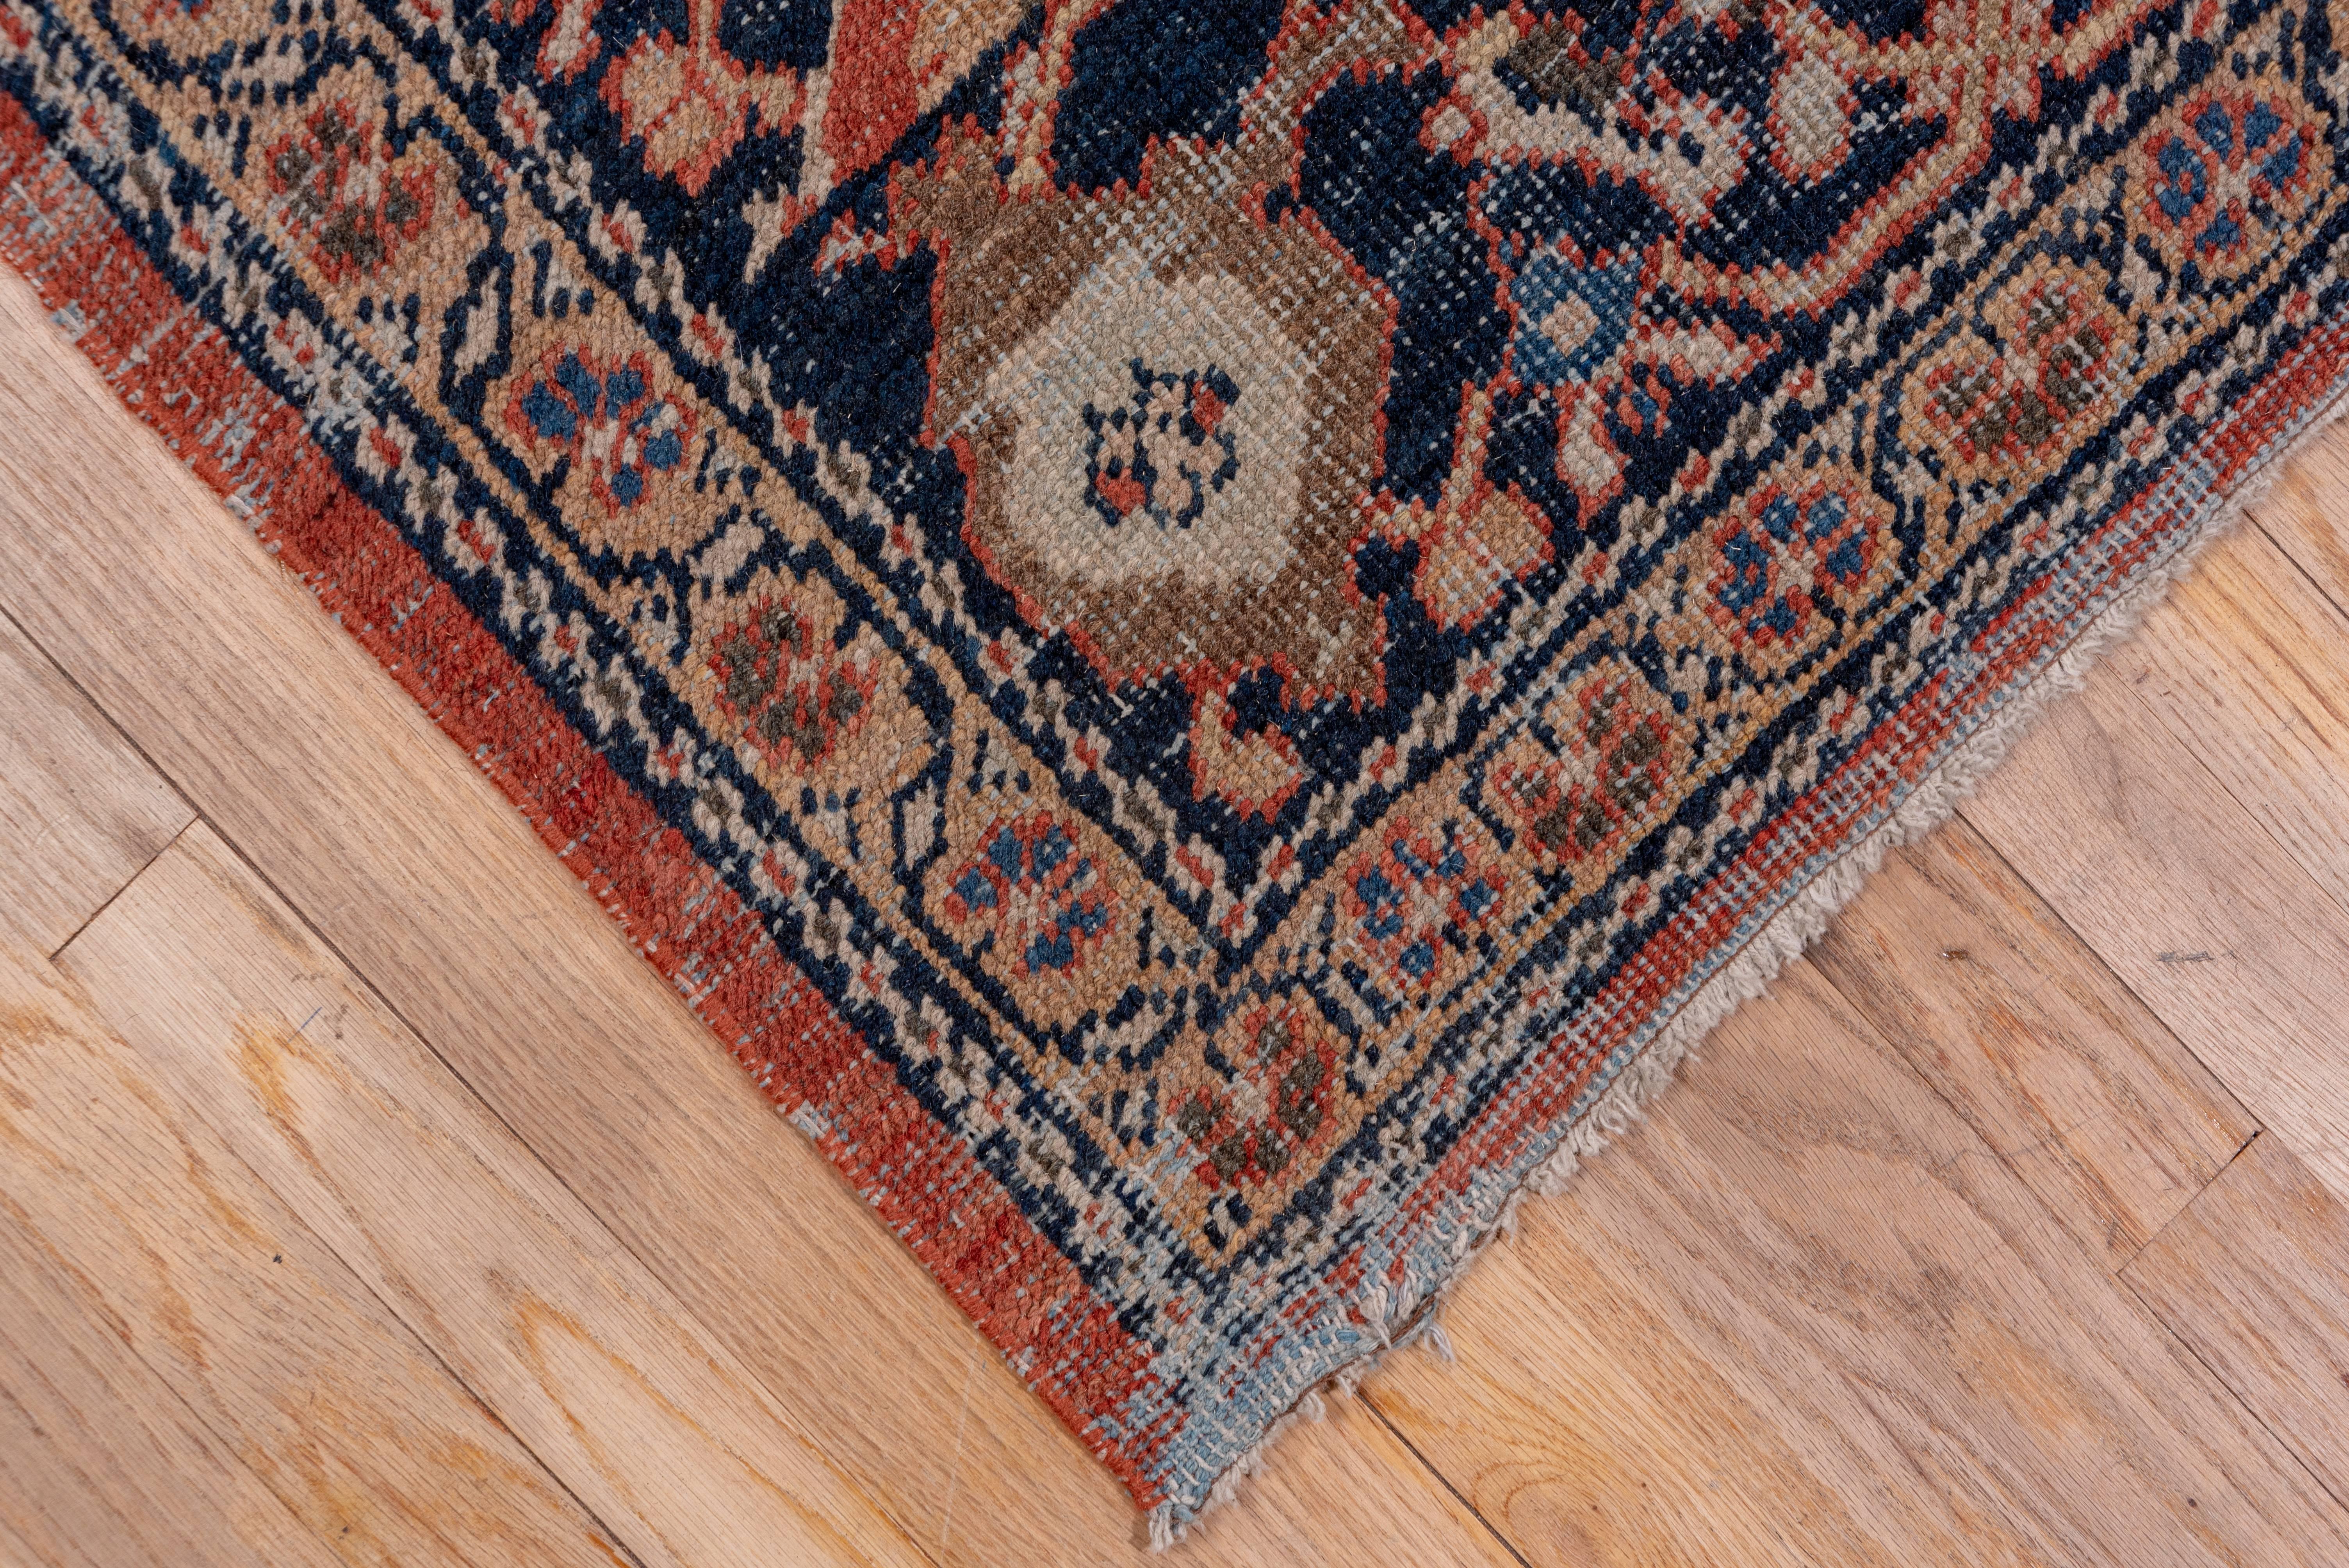 Hand-Knotted Antique Red Persian Mahal Carpet